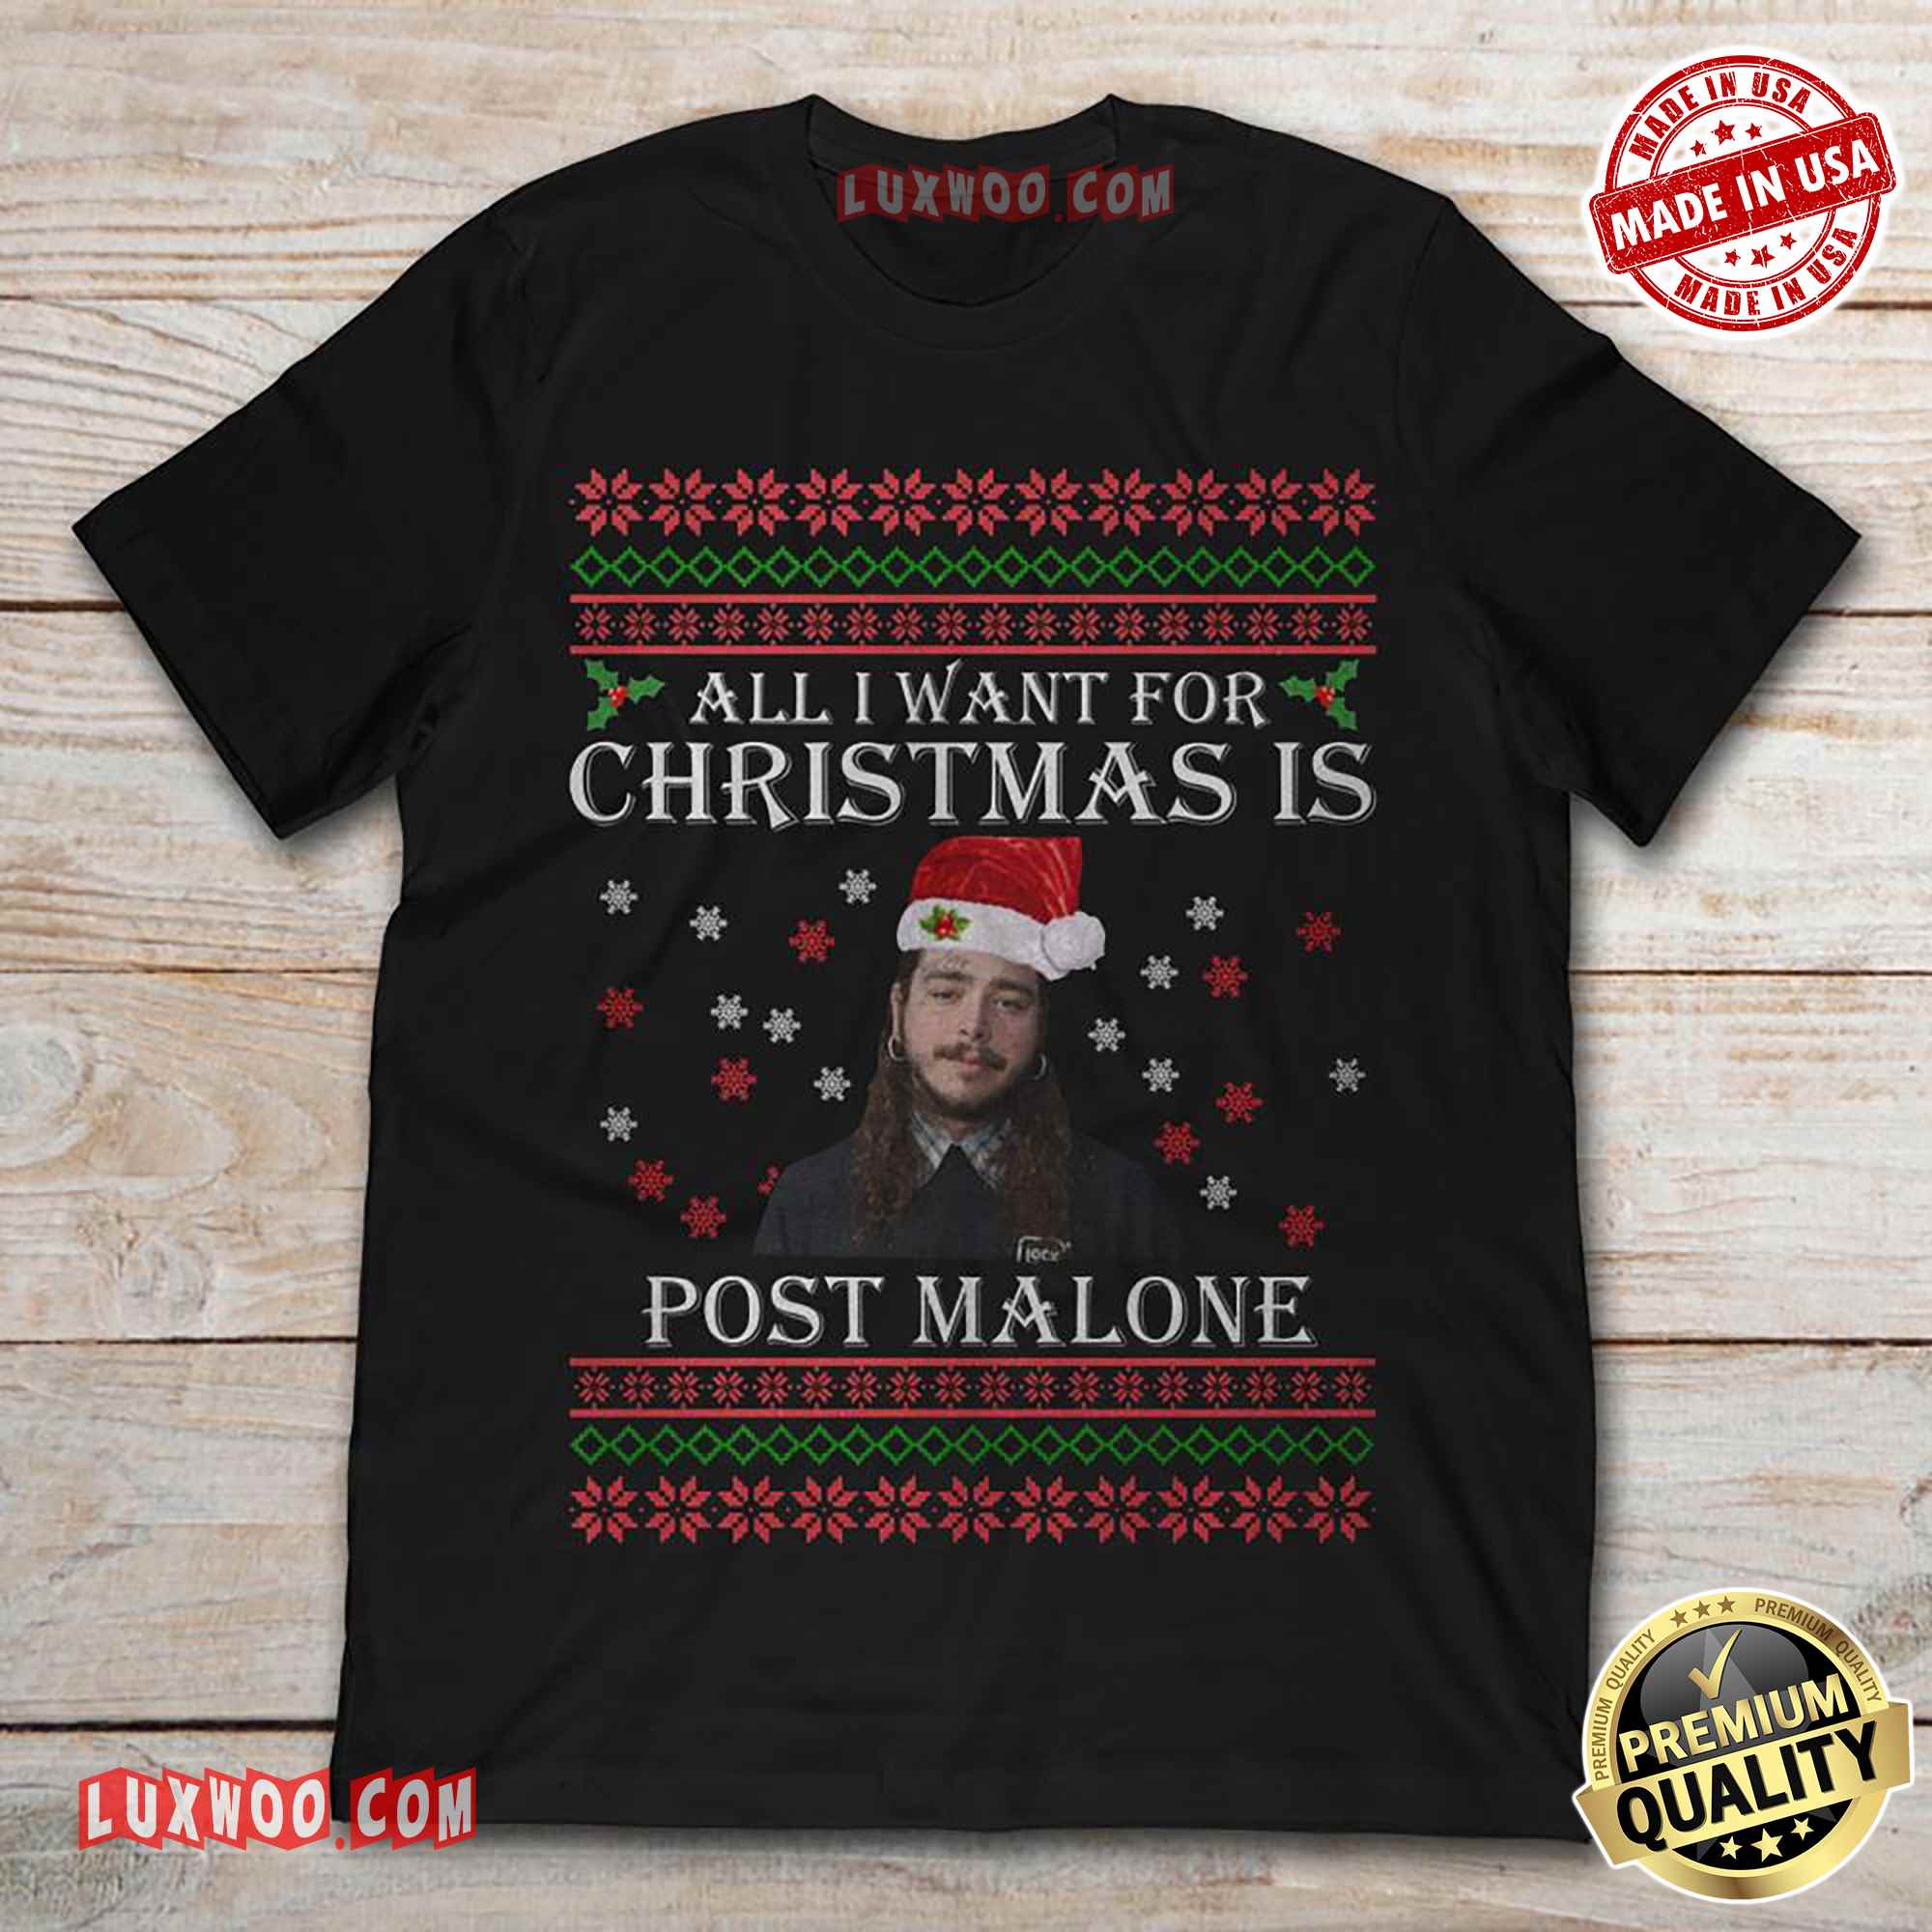 All I Want For Christmas Is Post Malone Tee Shirt